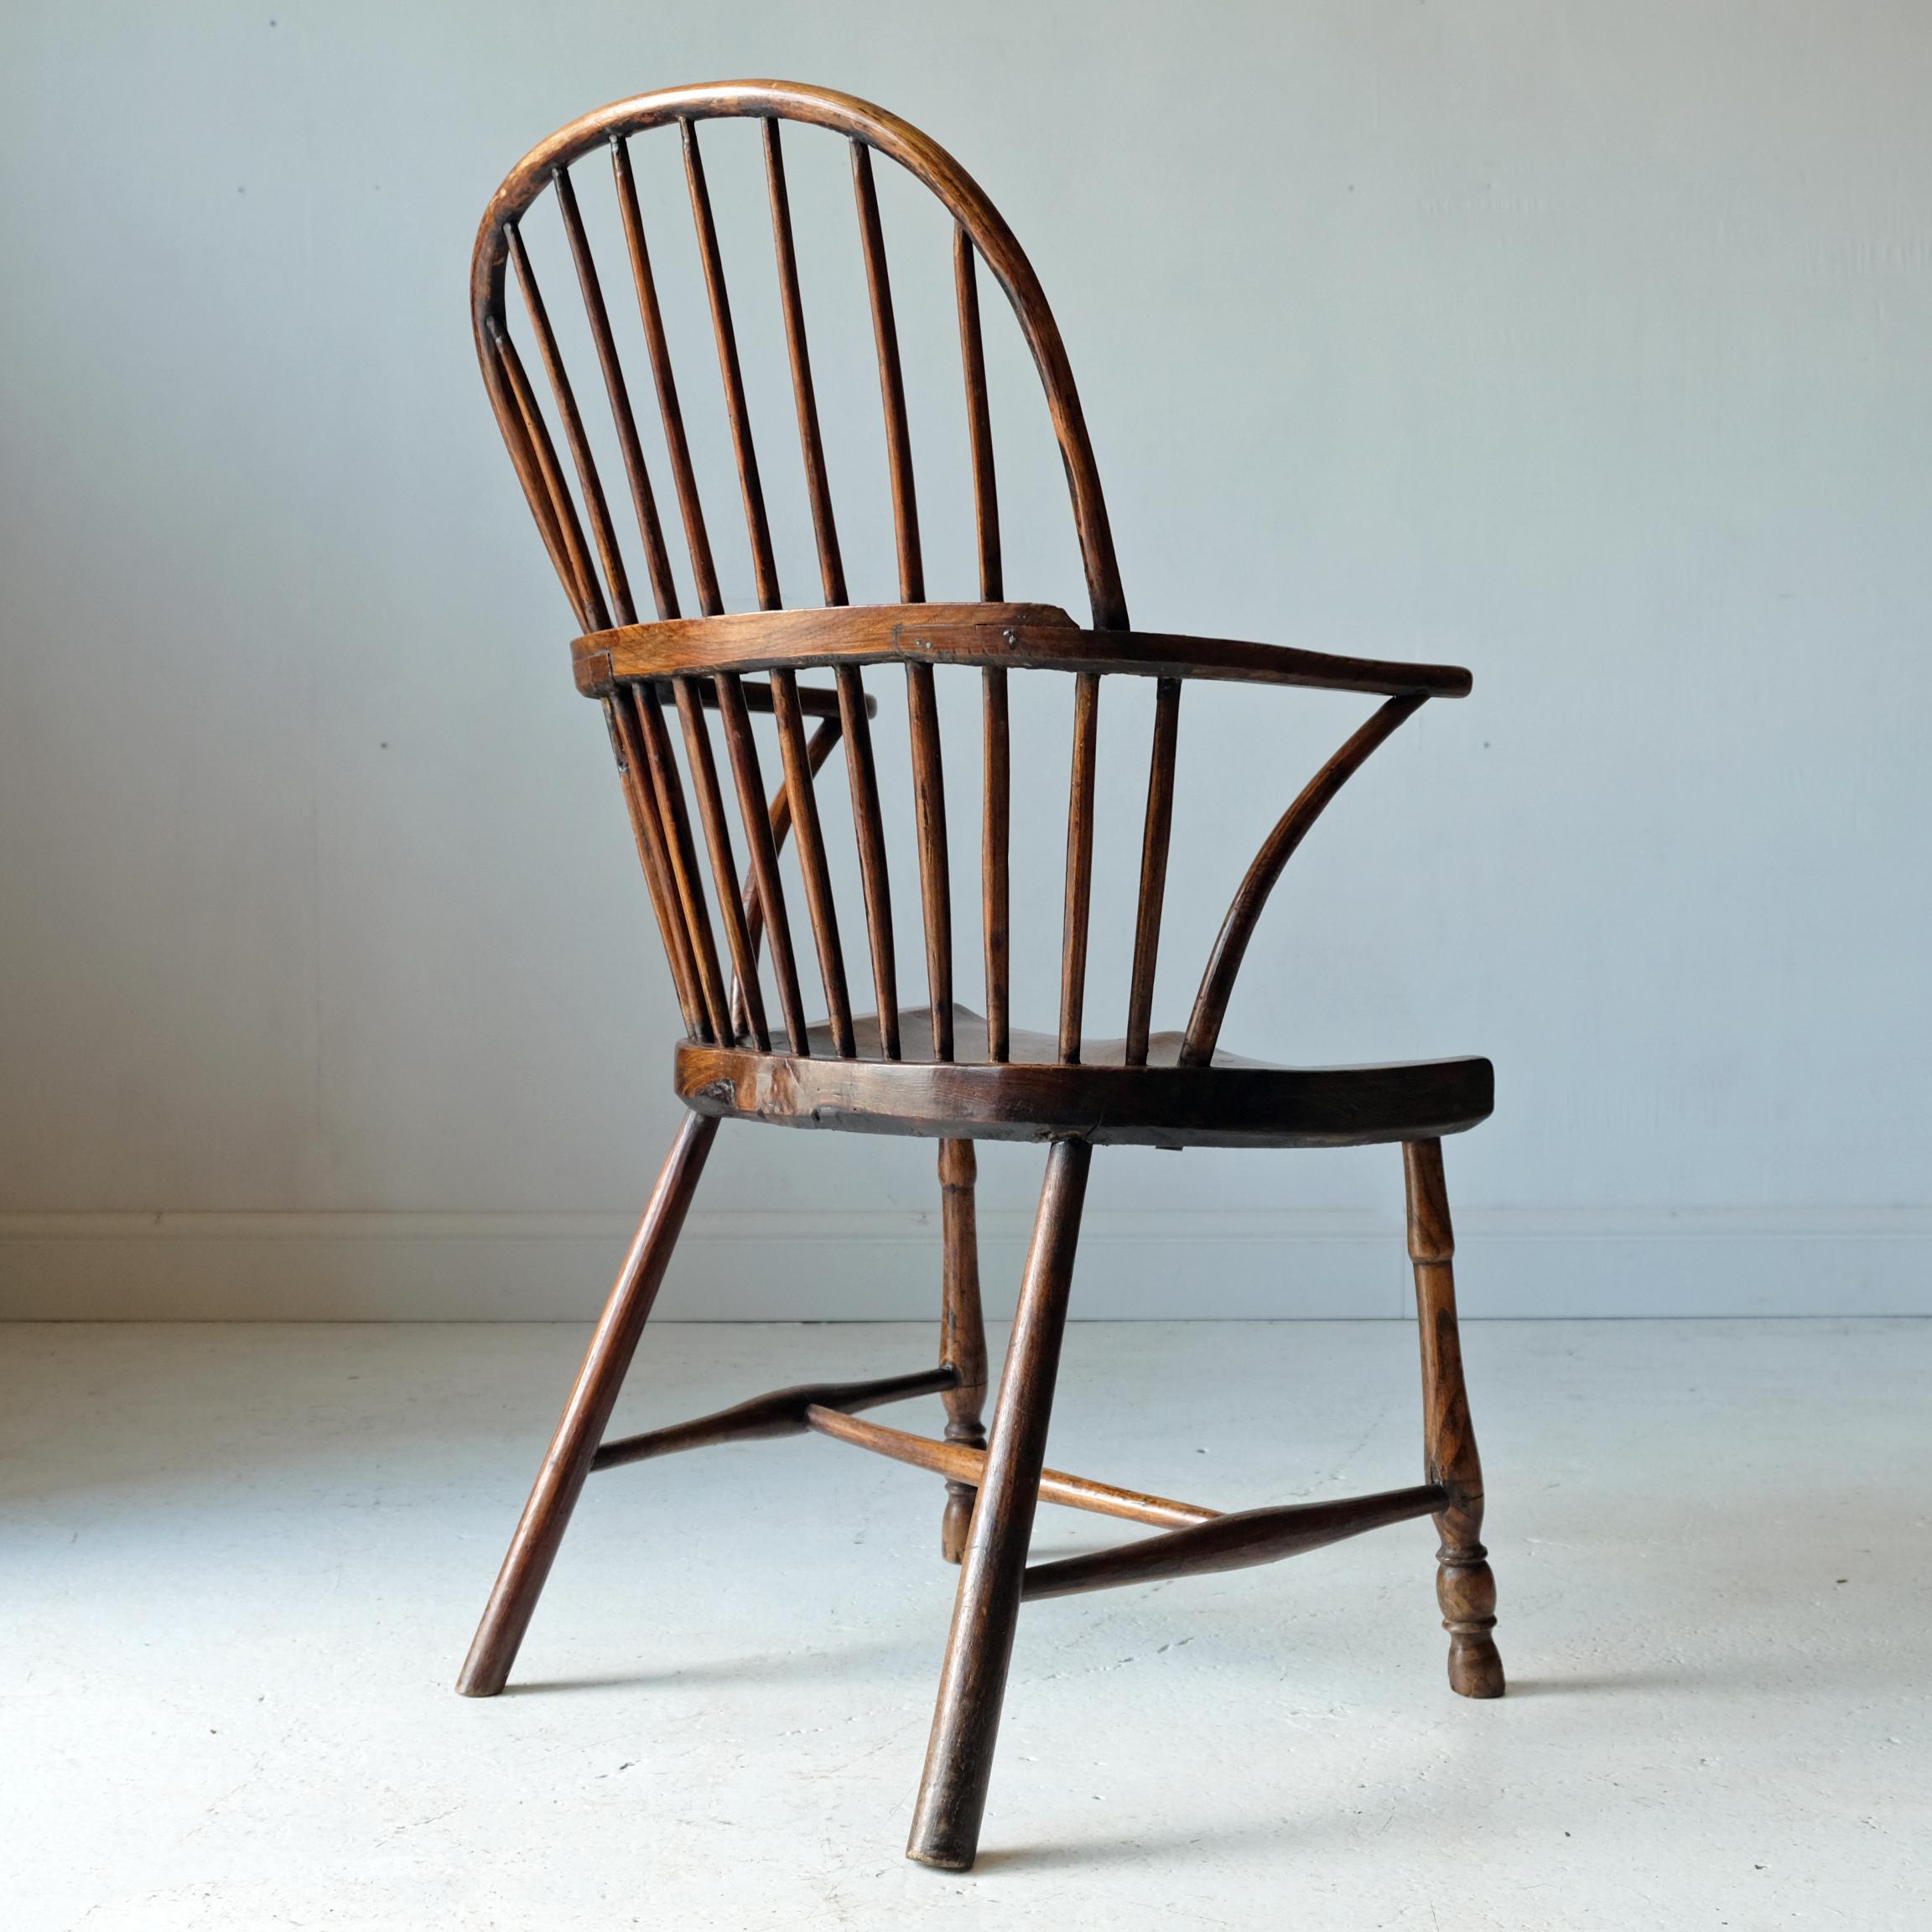 Ash Simple Burr Elm Country Windsor Chair, Early 19th Century, Rustic, English